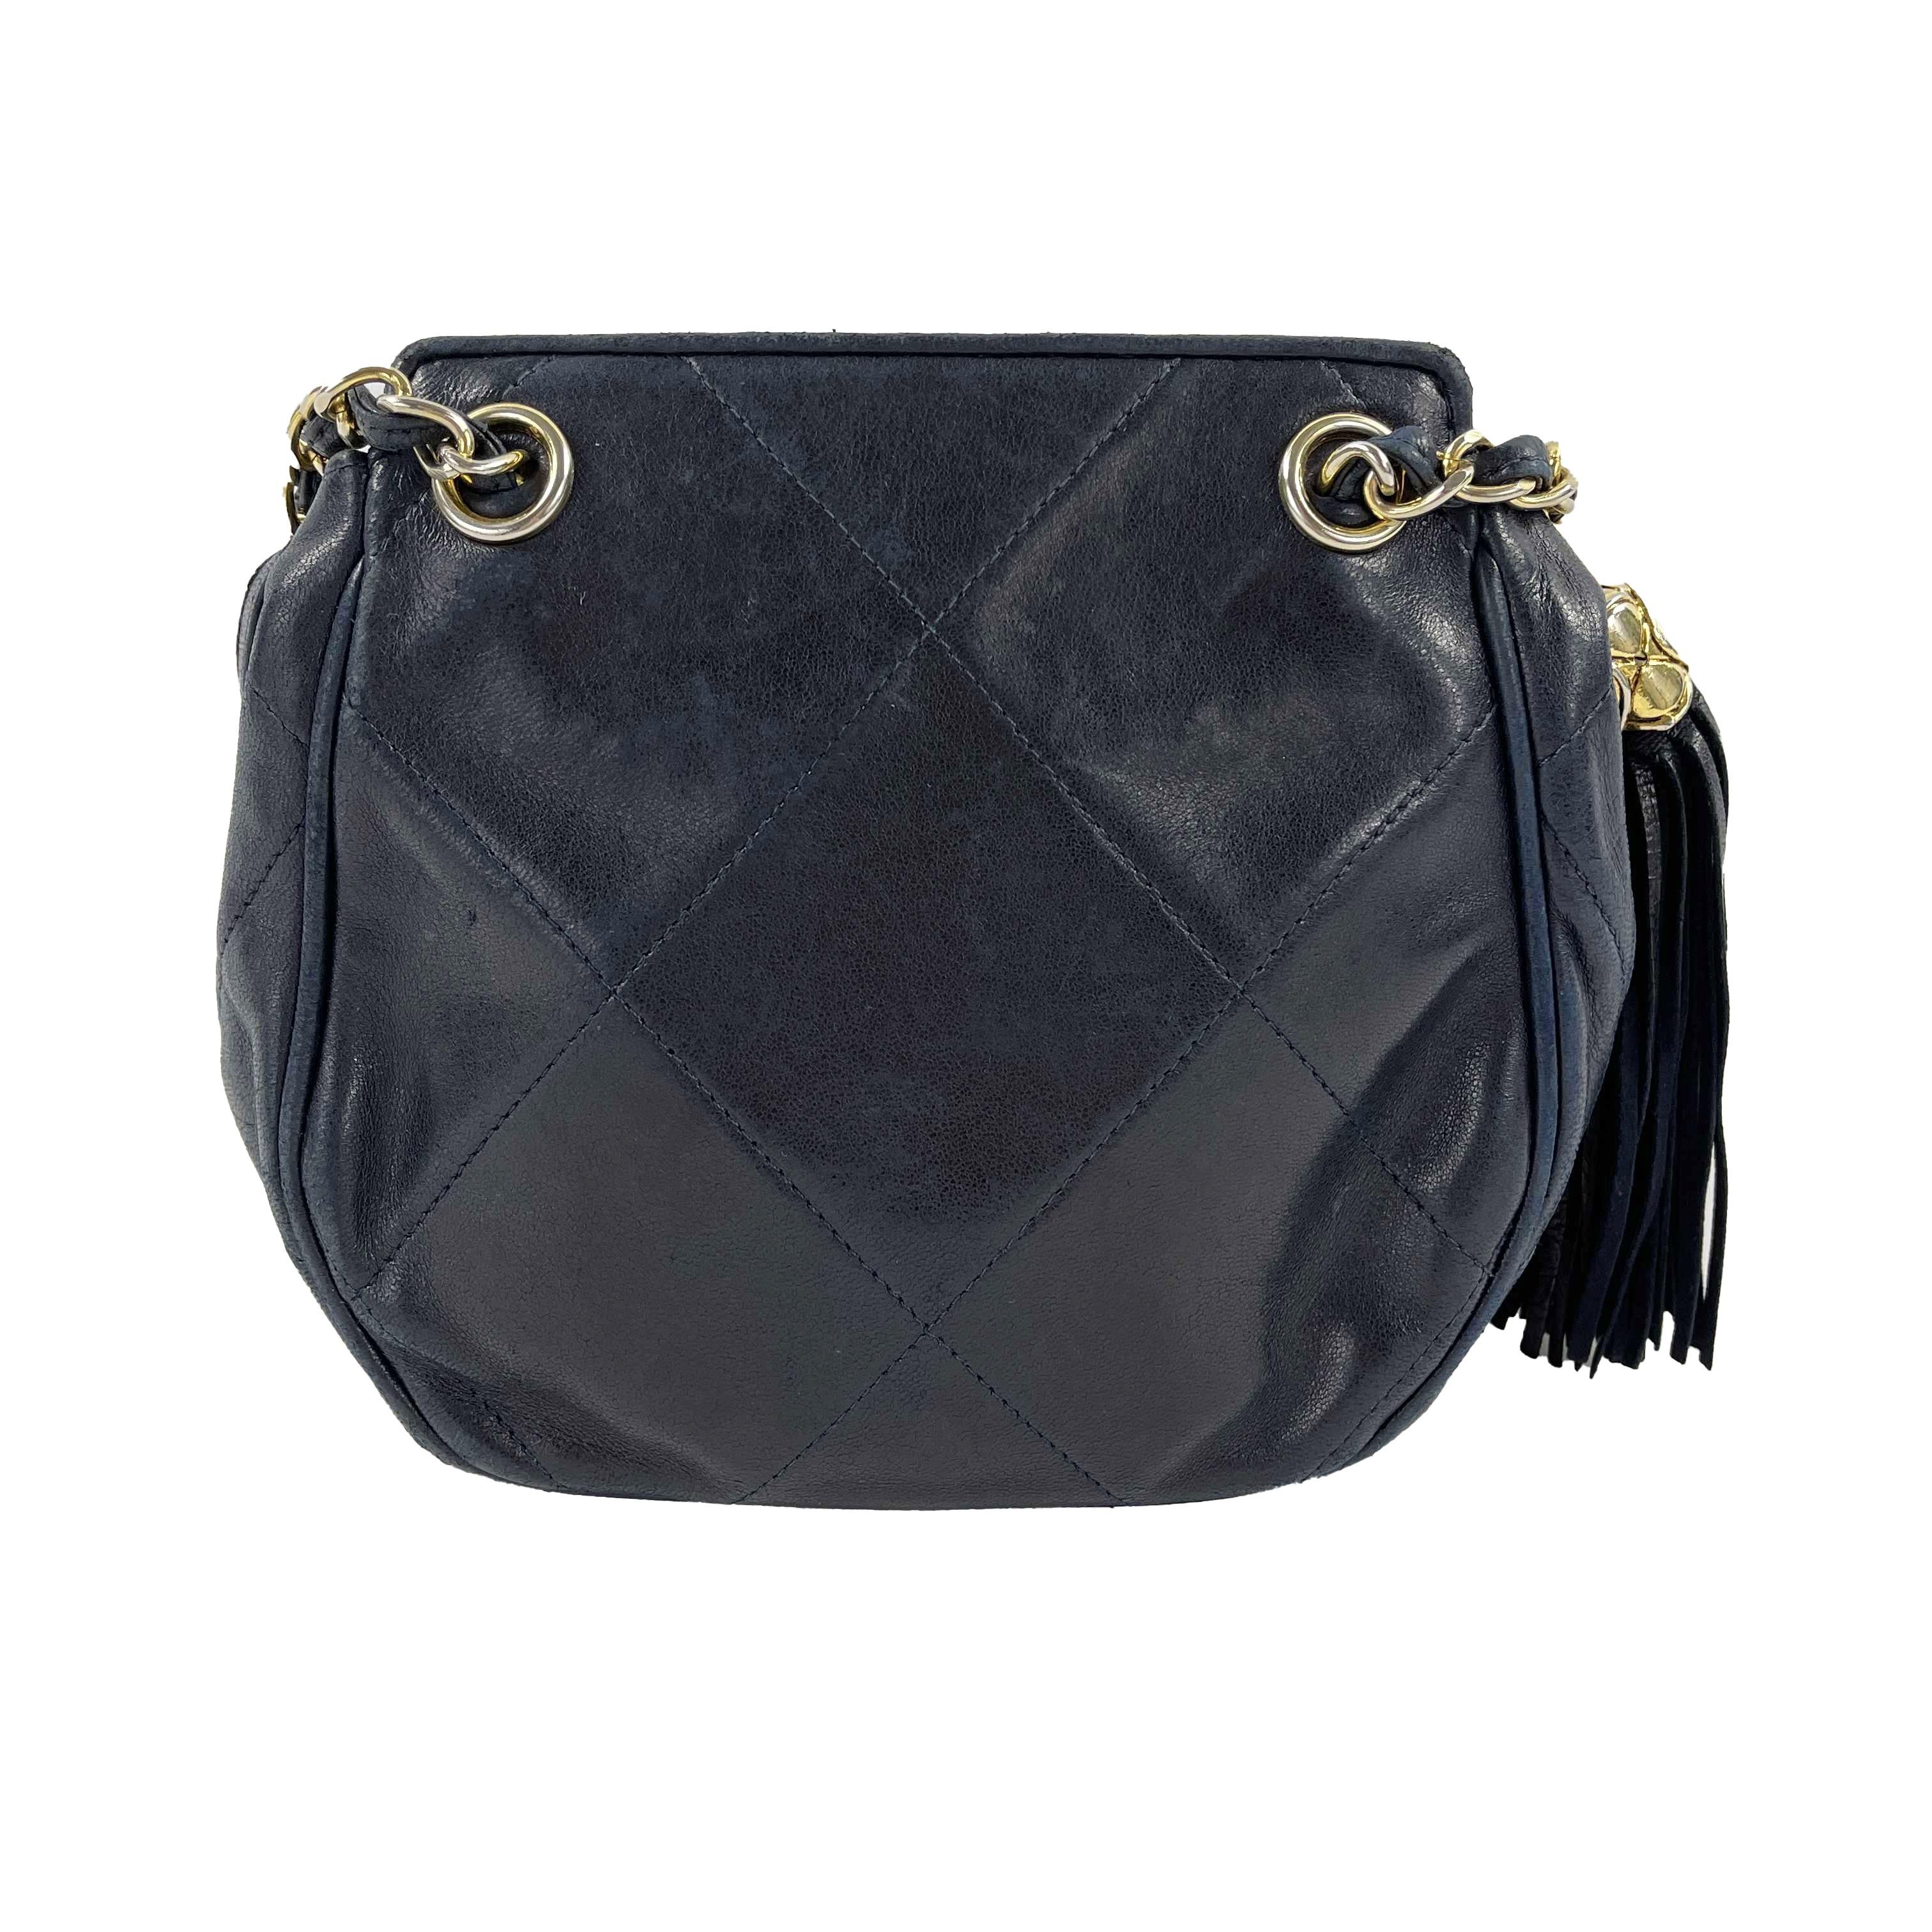 CHANEL-Vintage 80s/90s Navy CC Tassel Mini Diamond Quilted Leather Crossbody

Description

Vintage 1989-1991 era.
This bag is made in navy blue supple iconic quilted diamond pattern lambskin leather with a tassel featuring a decorative quilted CC